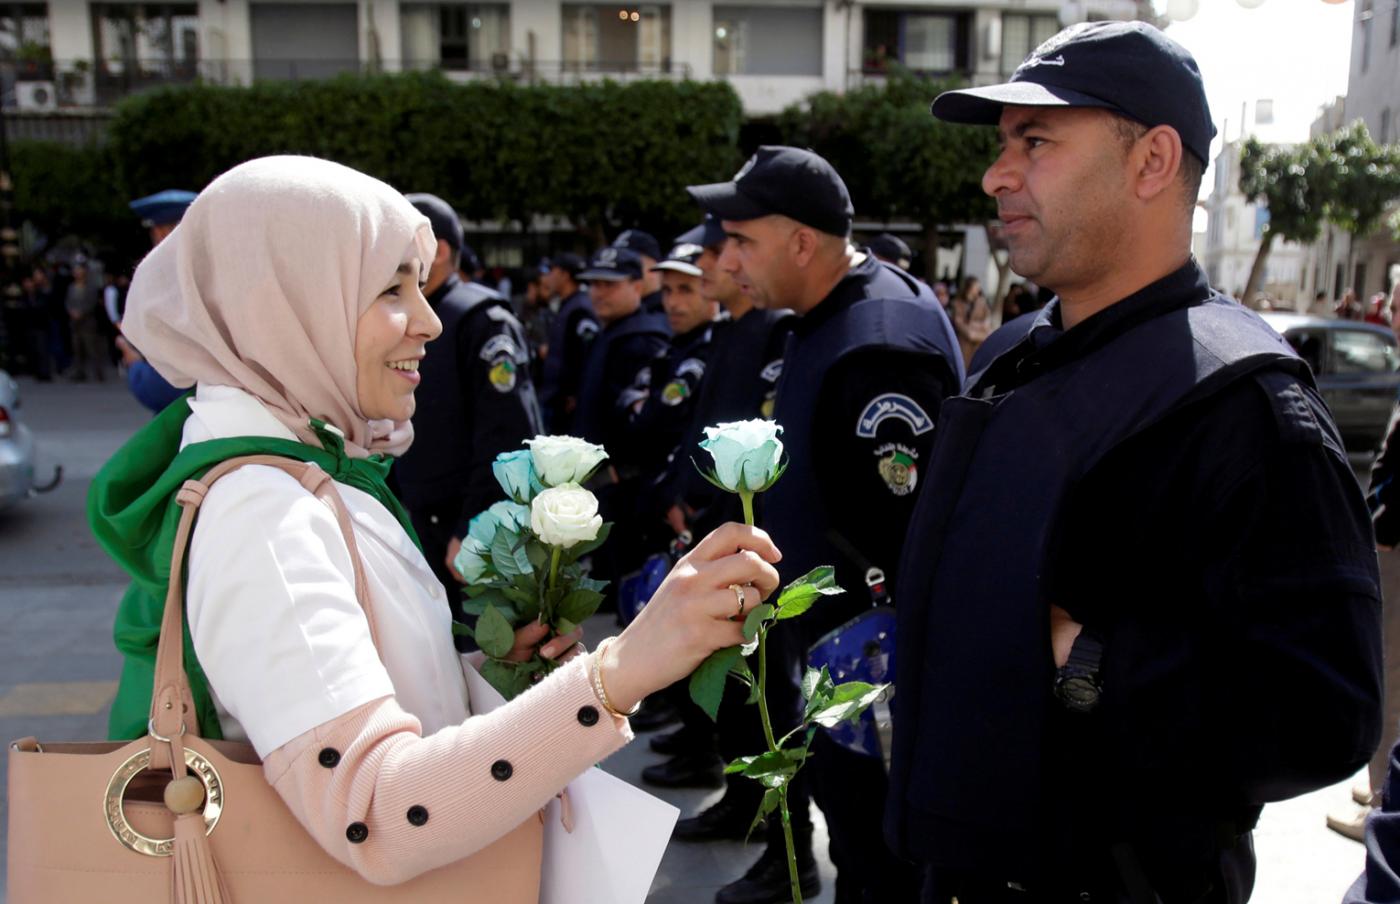 An Algerian protester offers roses to police during protests by teachers, lawyers and officials in several cities across the country on Wednesday, 13 March (Reuters)